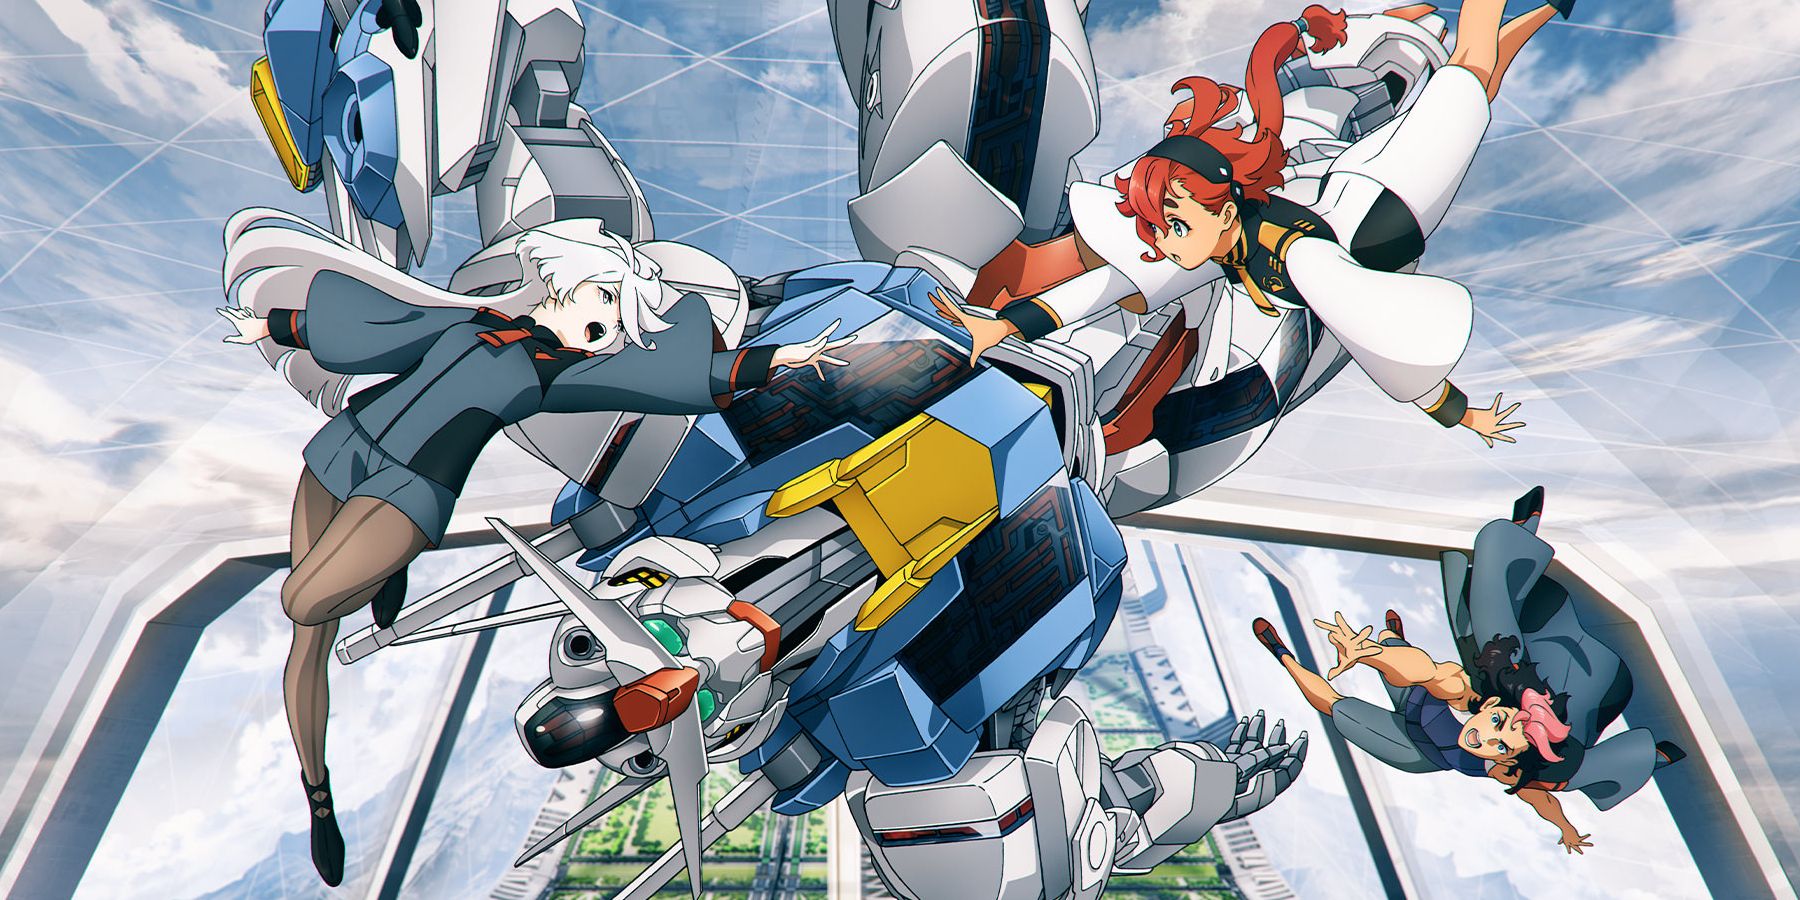 Miorine Rembran, Selutta Mercury, Guel Jeturk, and Selutta's  XVF-016 Gundam Aerial in the sky in Mobile Suit Gundam The Witch From Mercury.